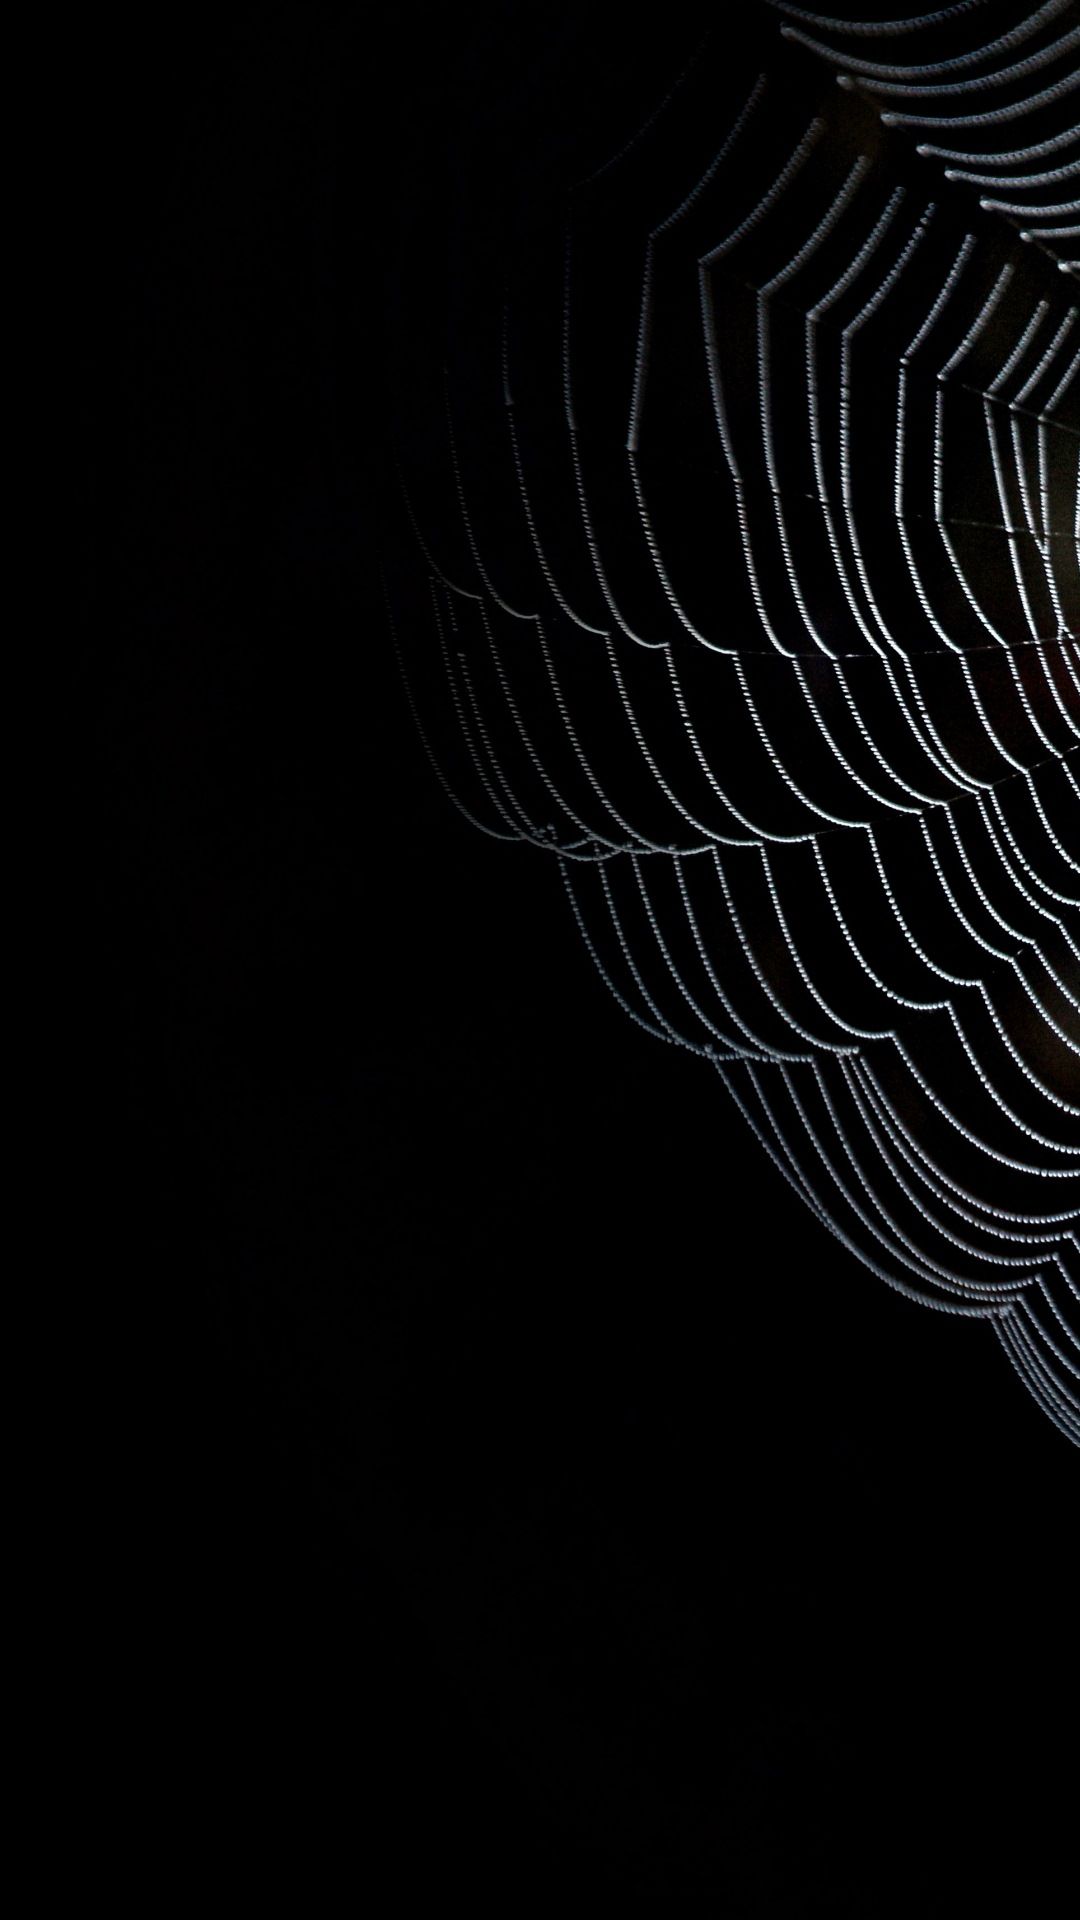 IPhone Wallpaper. Black, Spider Web, Black And White, Darkness